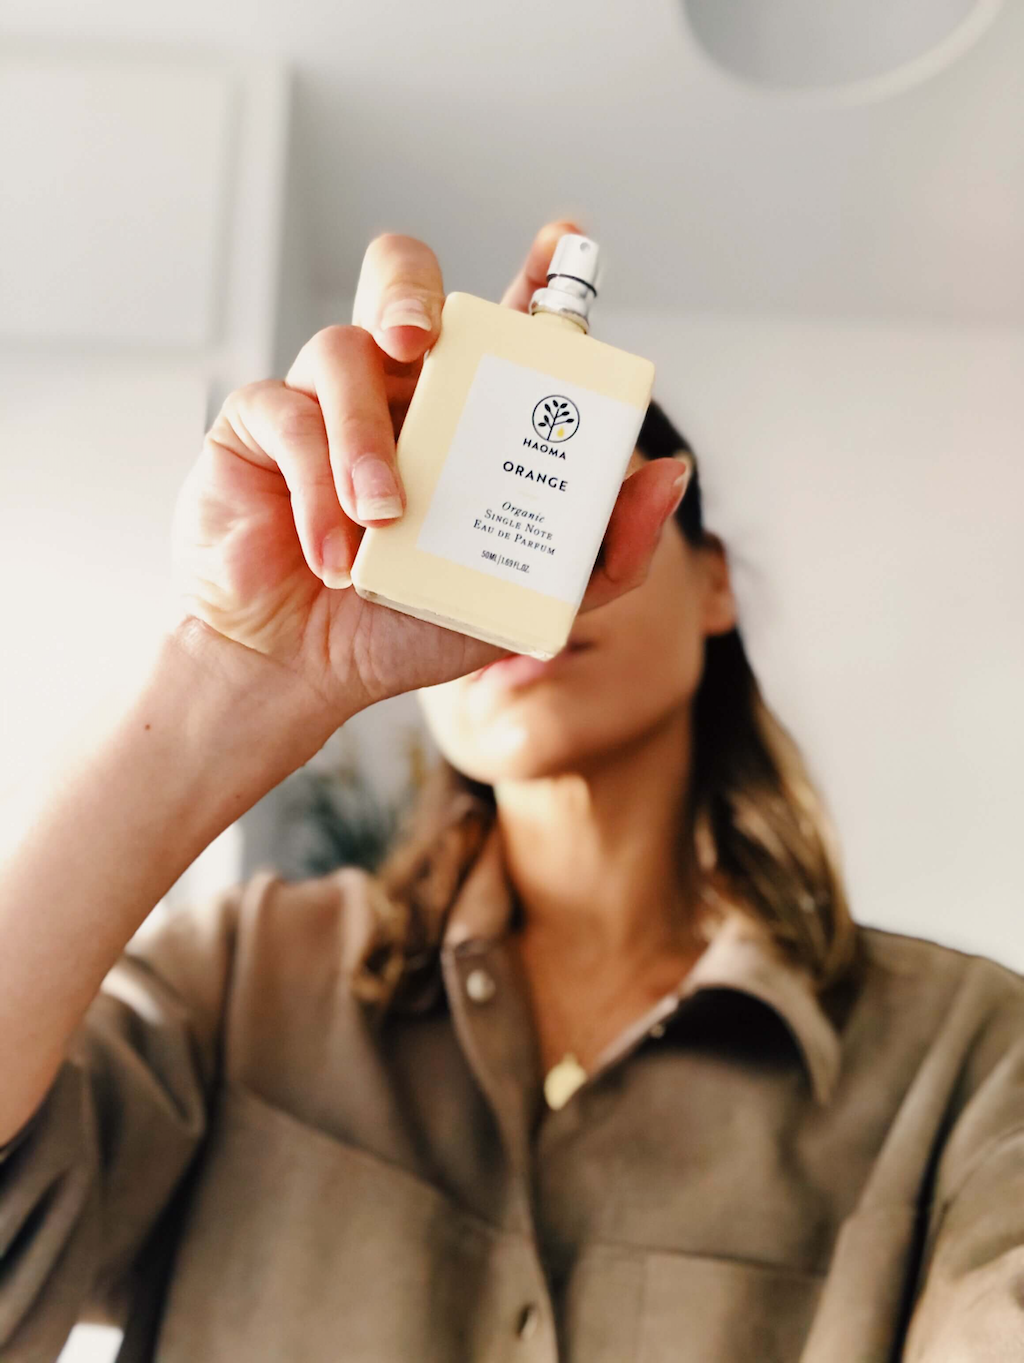 Haoma Organic Eau de Parfum. Certified organic perfumes. The Orange bottle is shown being held in someone's hand in the foreground as if they are about to spray it forward, with the hand and bottle covering their face in the background.